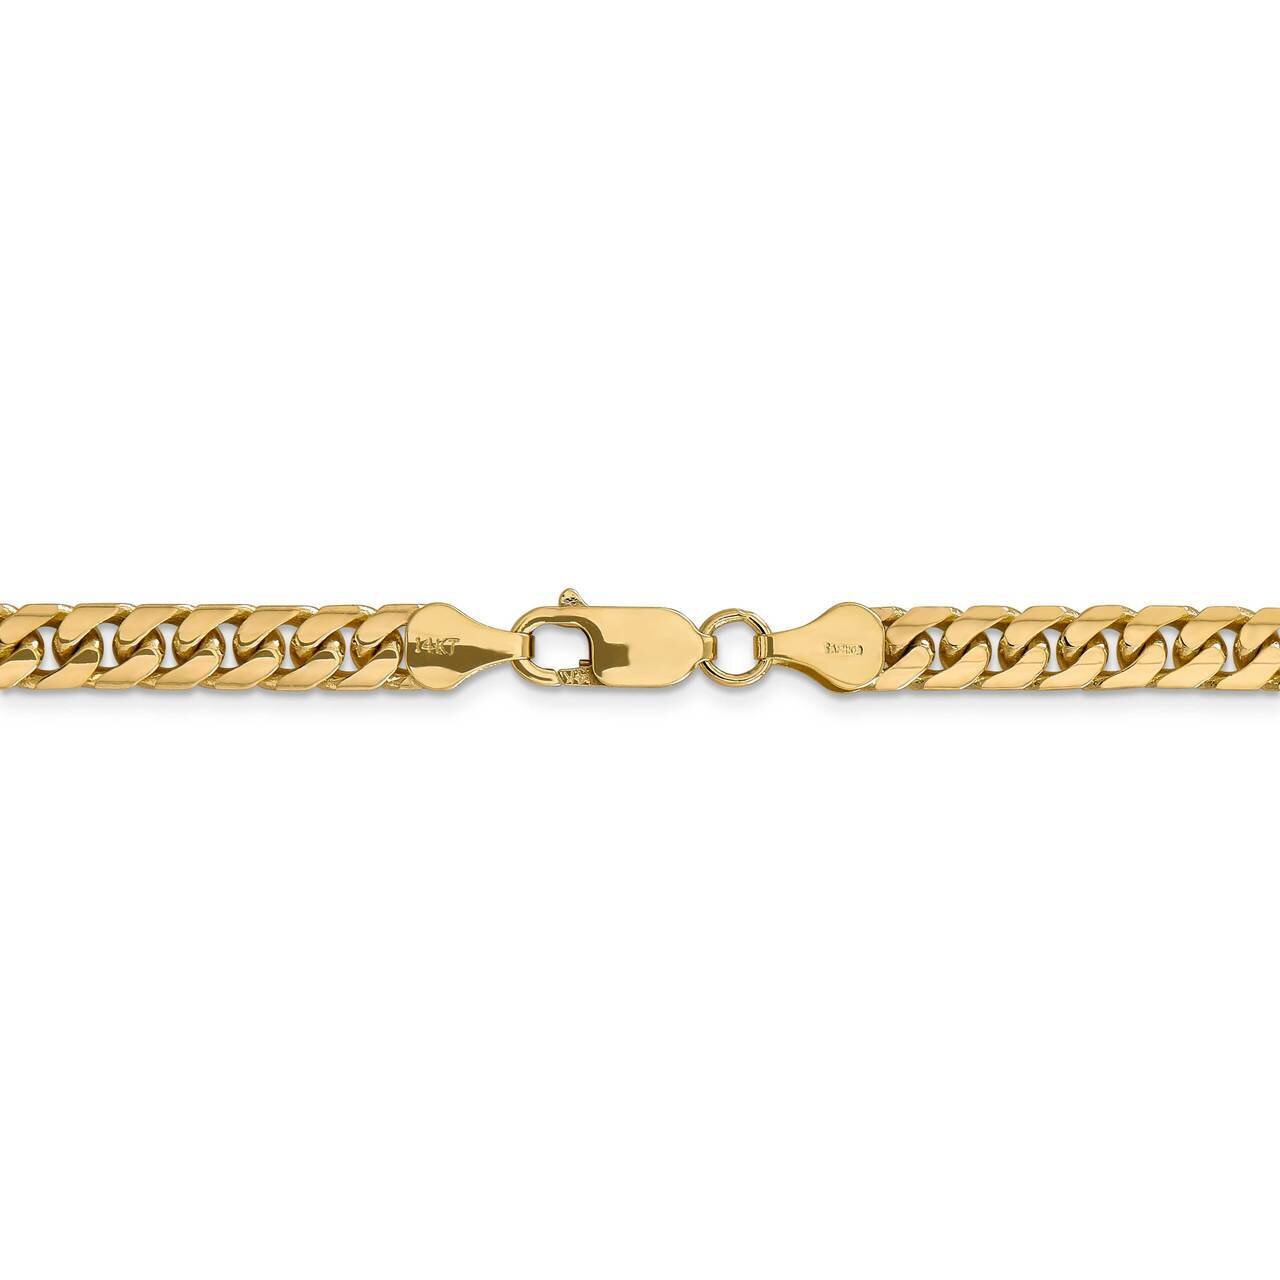 22 Inch 5.5mm Solid Miami Cuban Chain 14k Yellow Gold DCU180-22